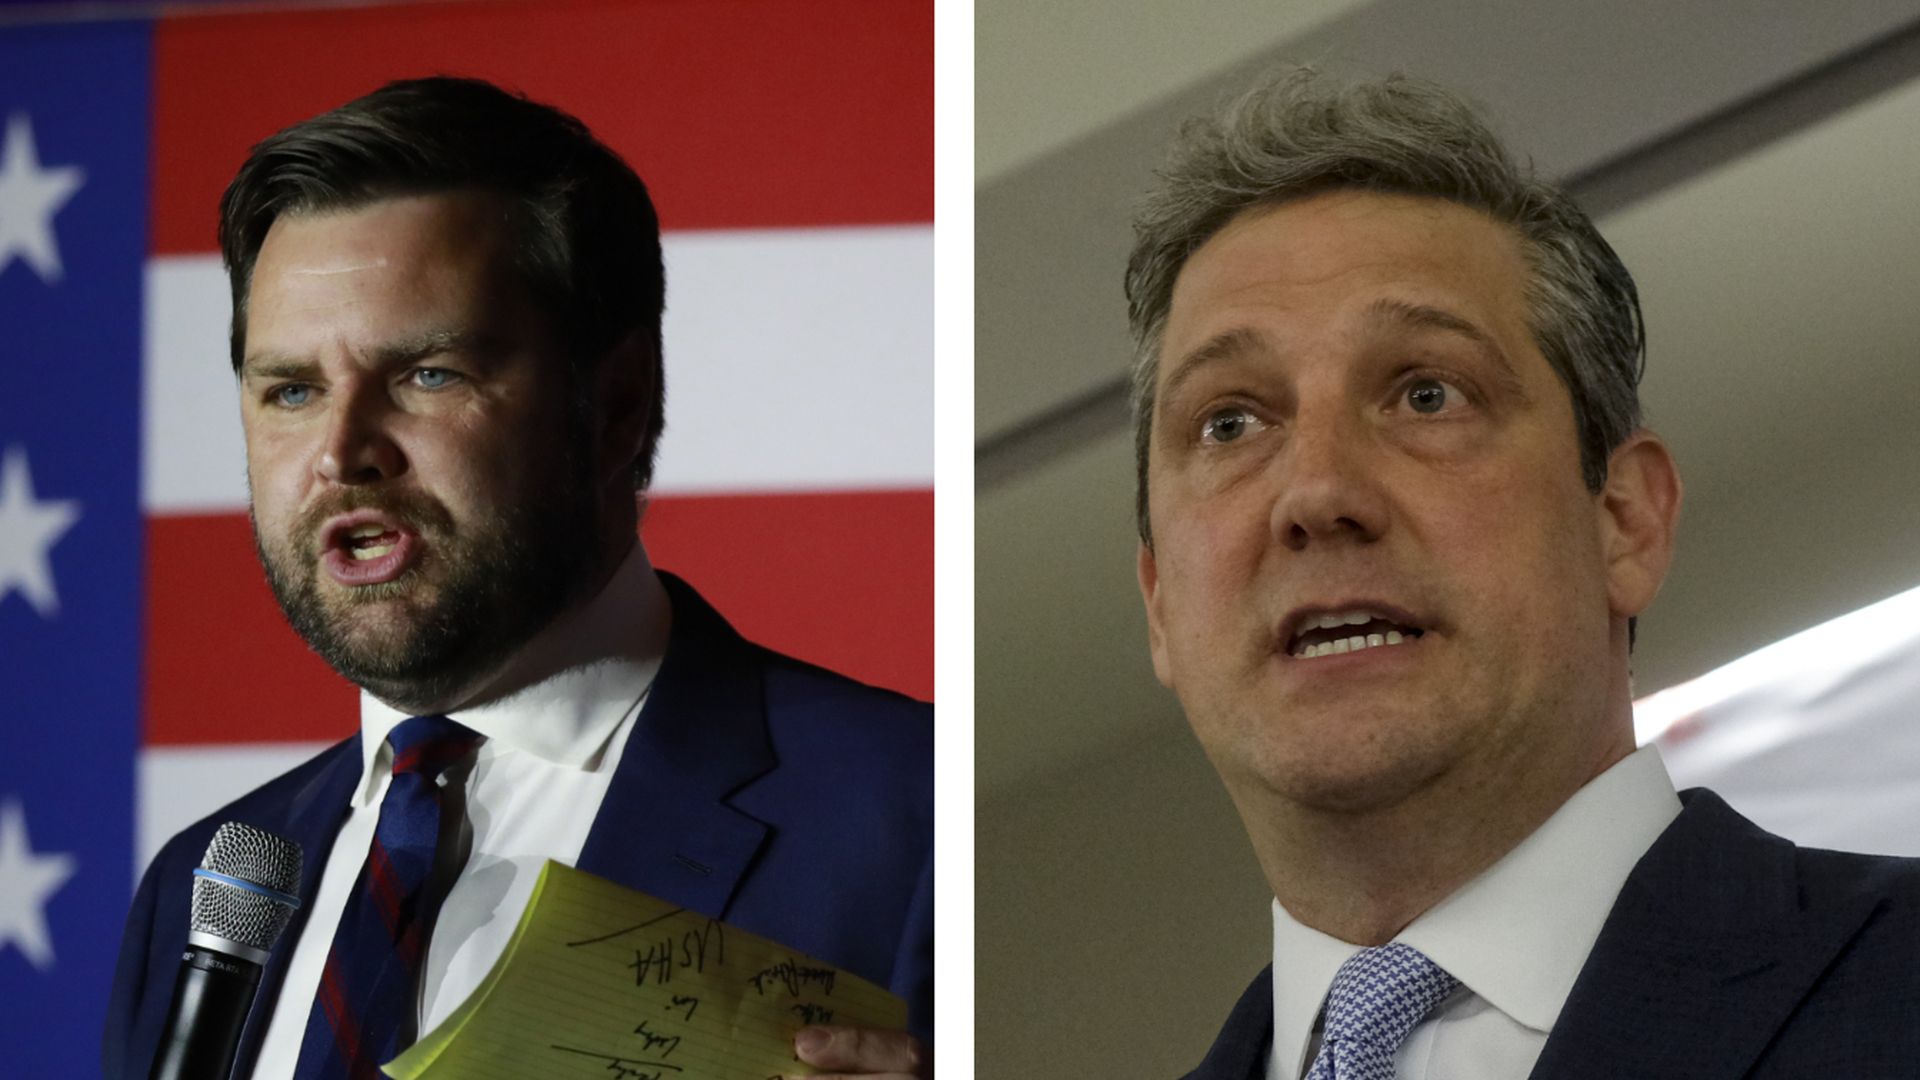 Combination images of Republican JD Vance and his Democratic rival Rep. Tim Ryan